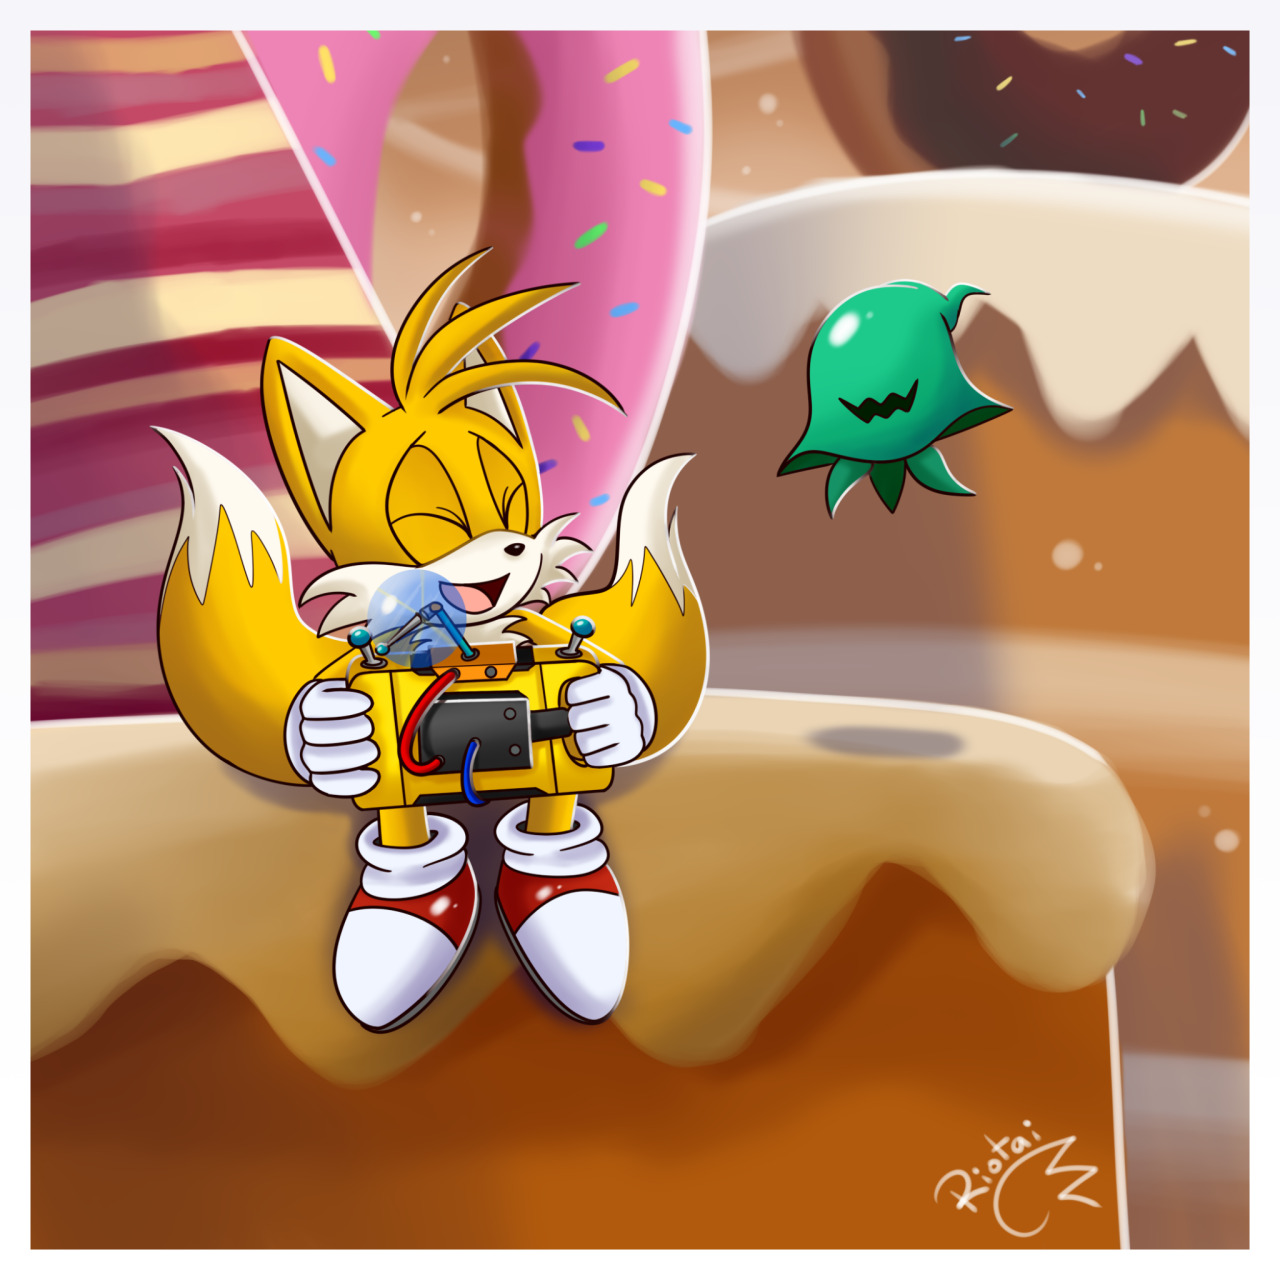 cohost! - Super Tails in Sonic 2